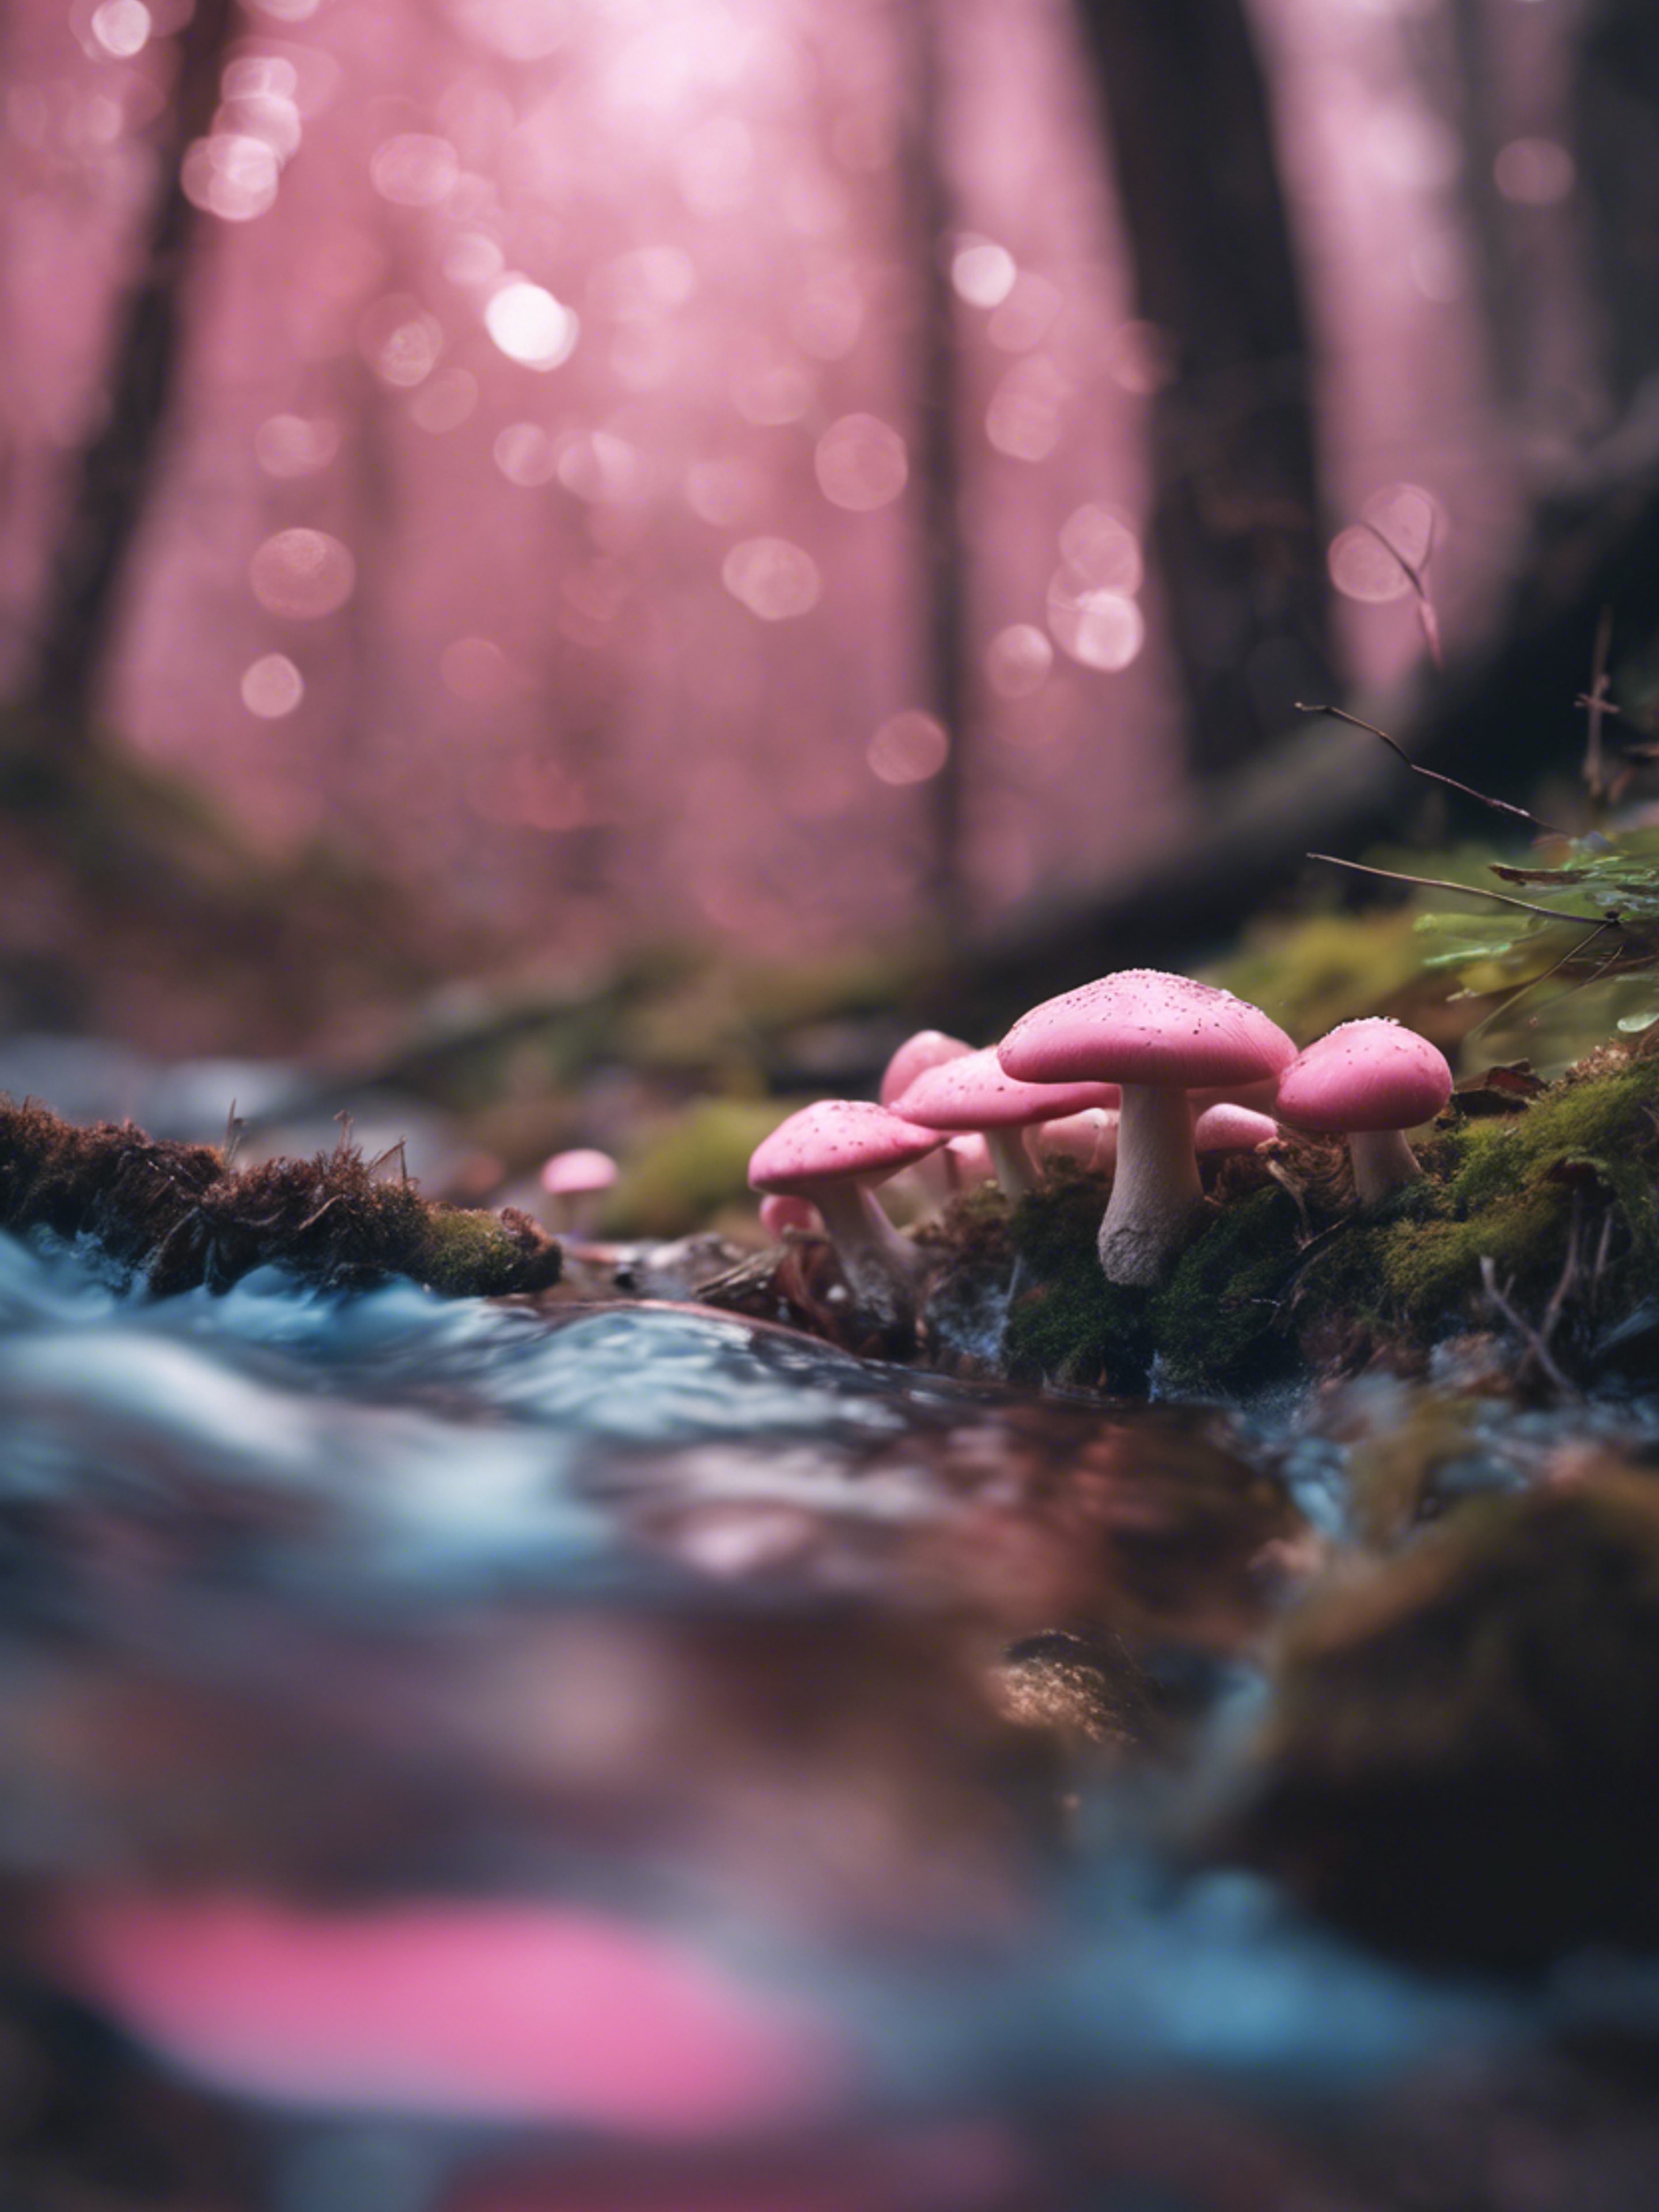 A scenic landscape of cute pink mushrooms growing next to a sparkling blue brook flowing through a mystic forest. Hintergrund[15649bdf42124ca6856a]